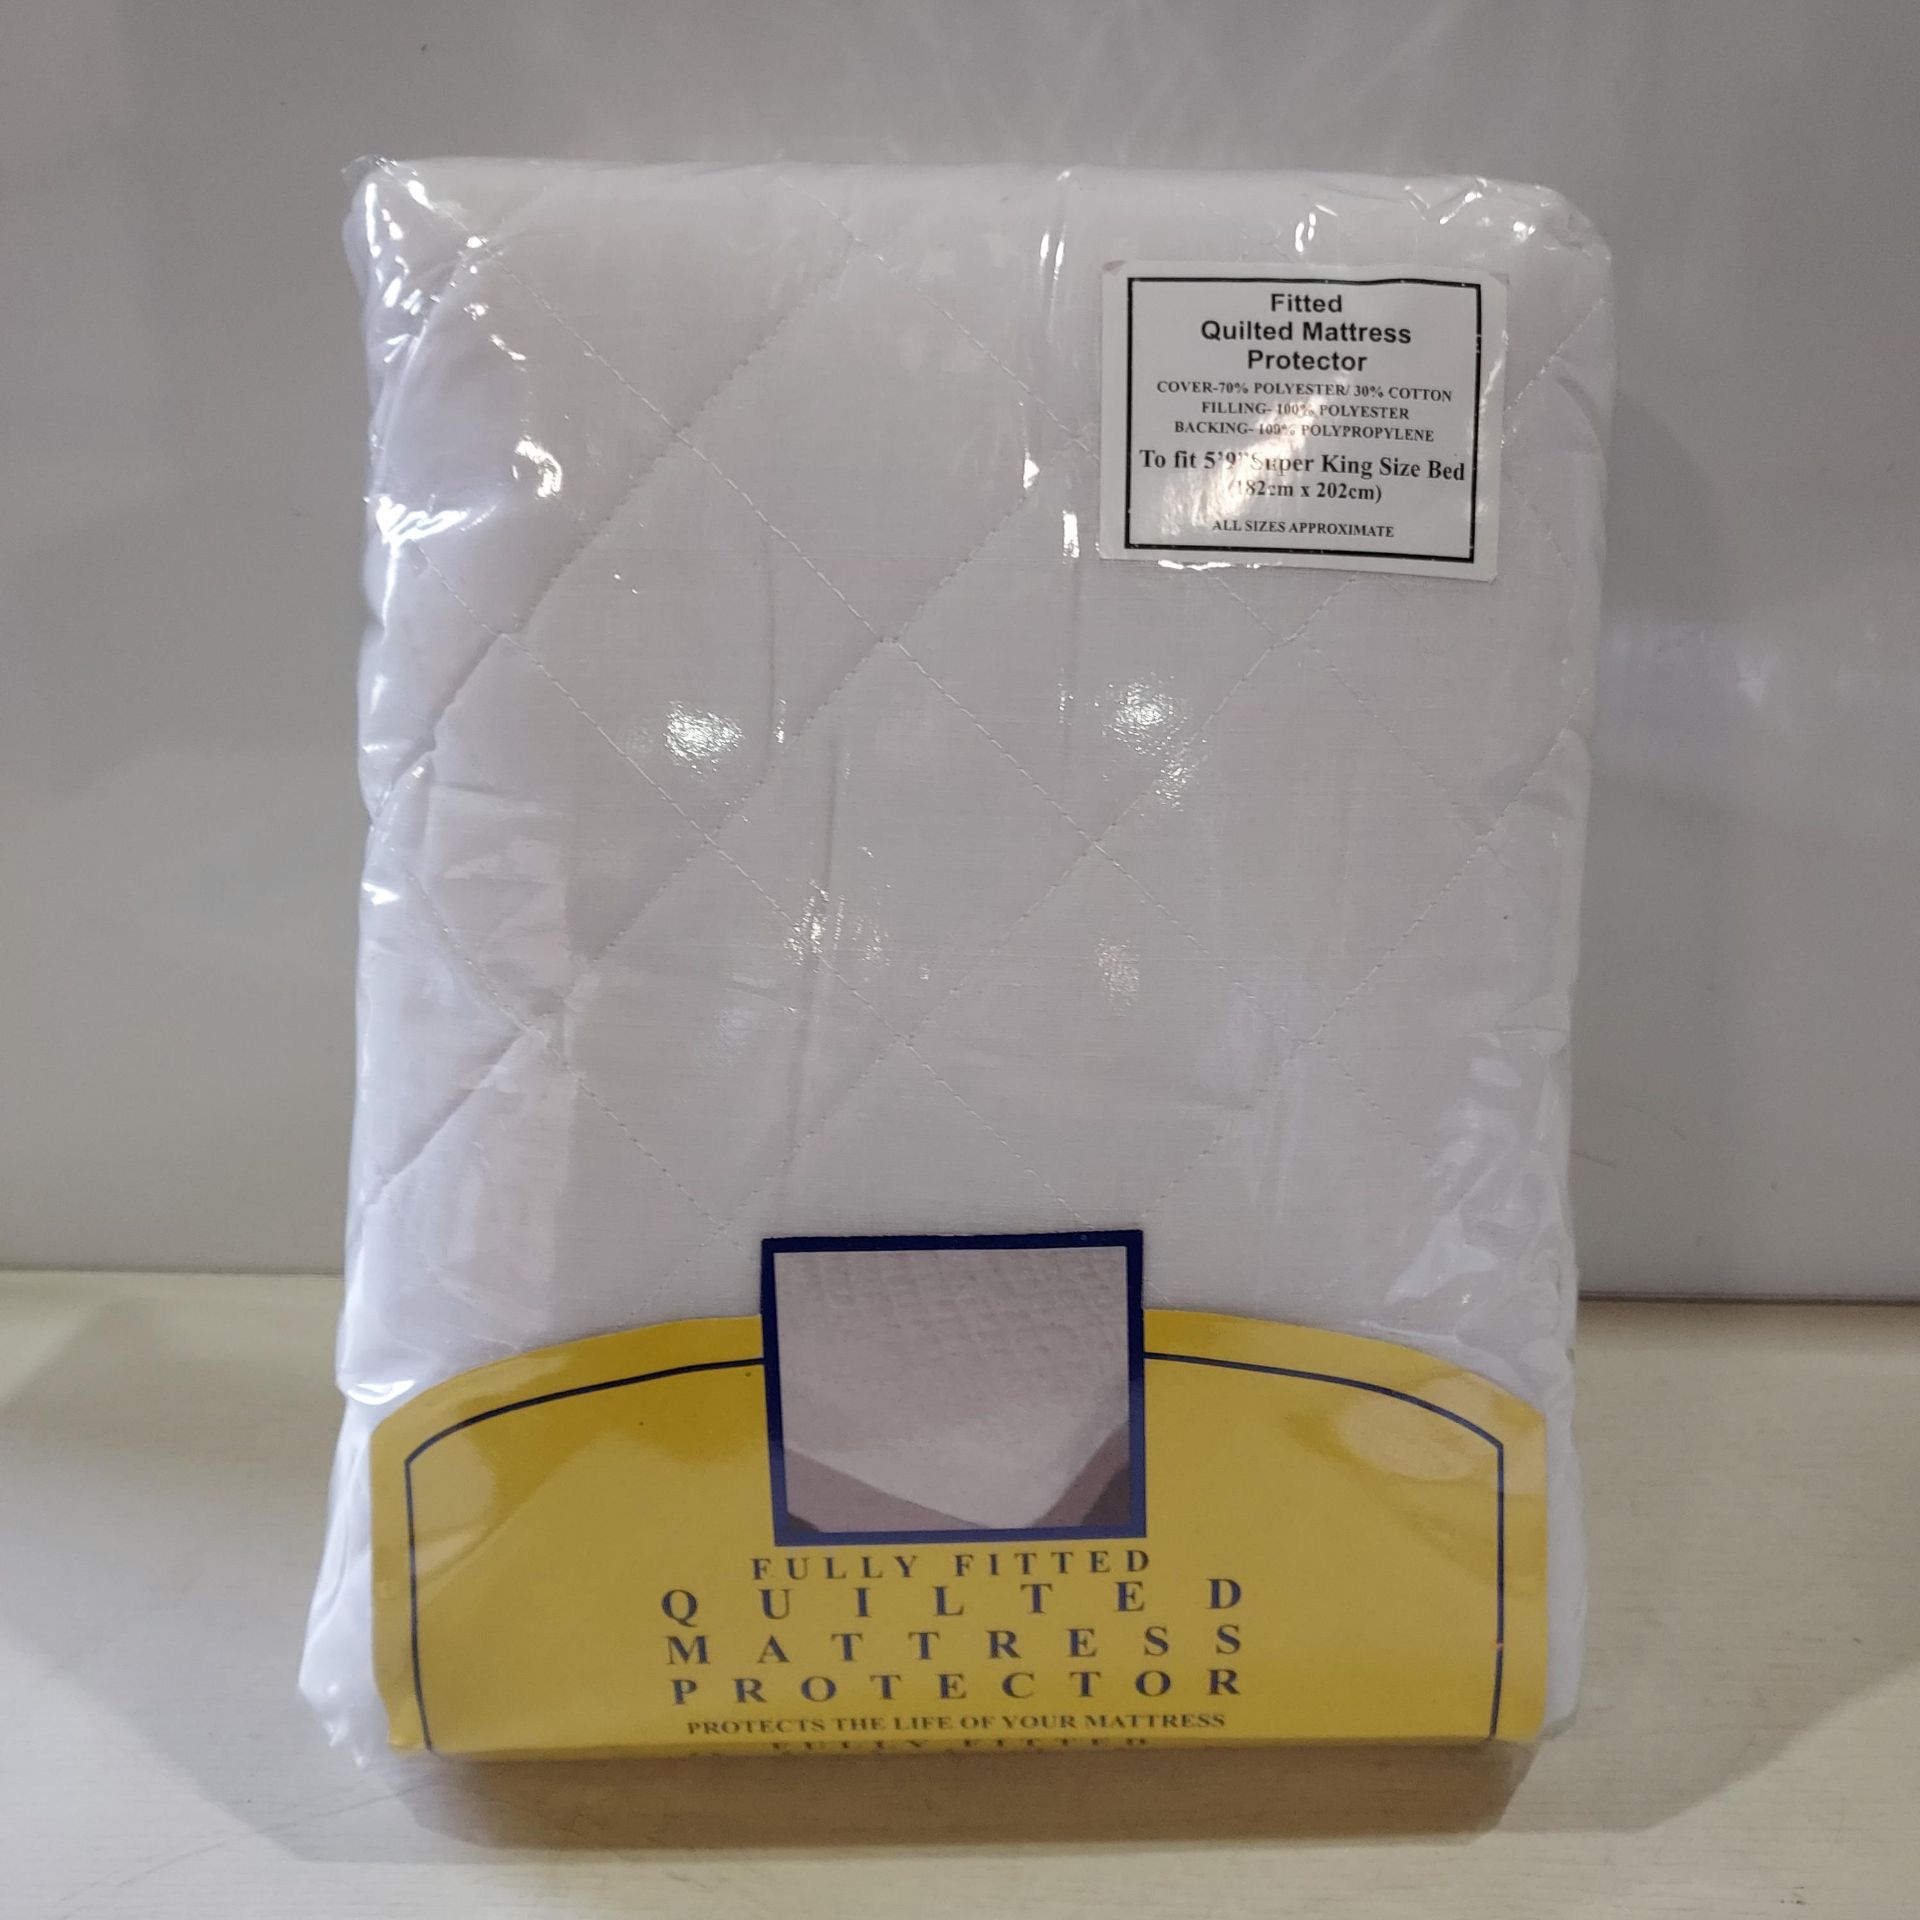 16 X BRAND NEW FULLY FITTED QUILTED MATTRESS PROTECTORS - SUPER KING SIZE - IN 2 BOXES